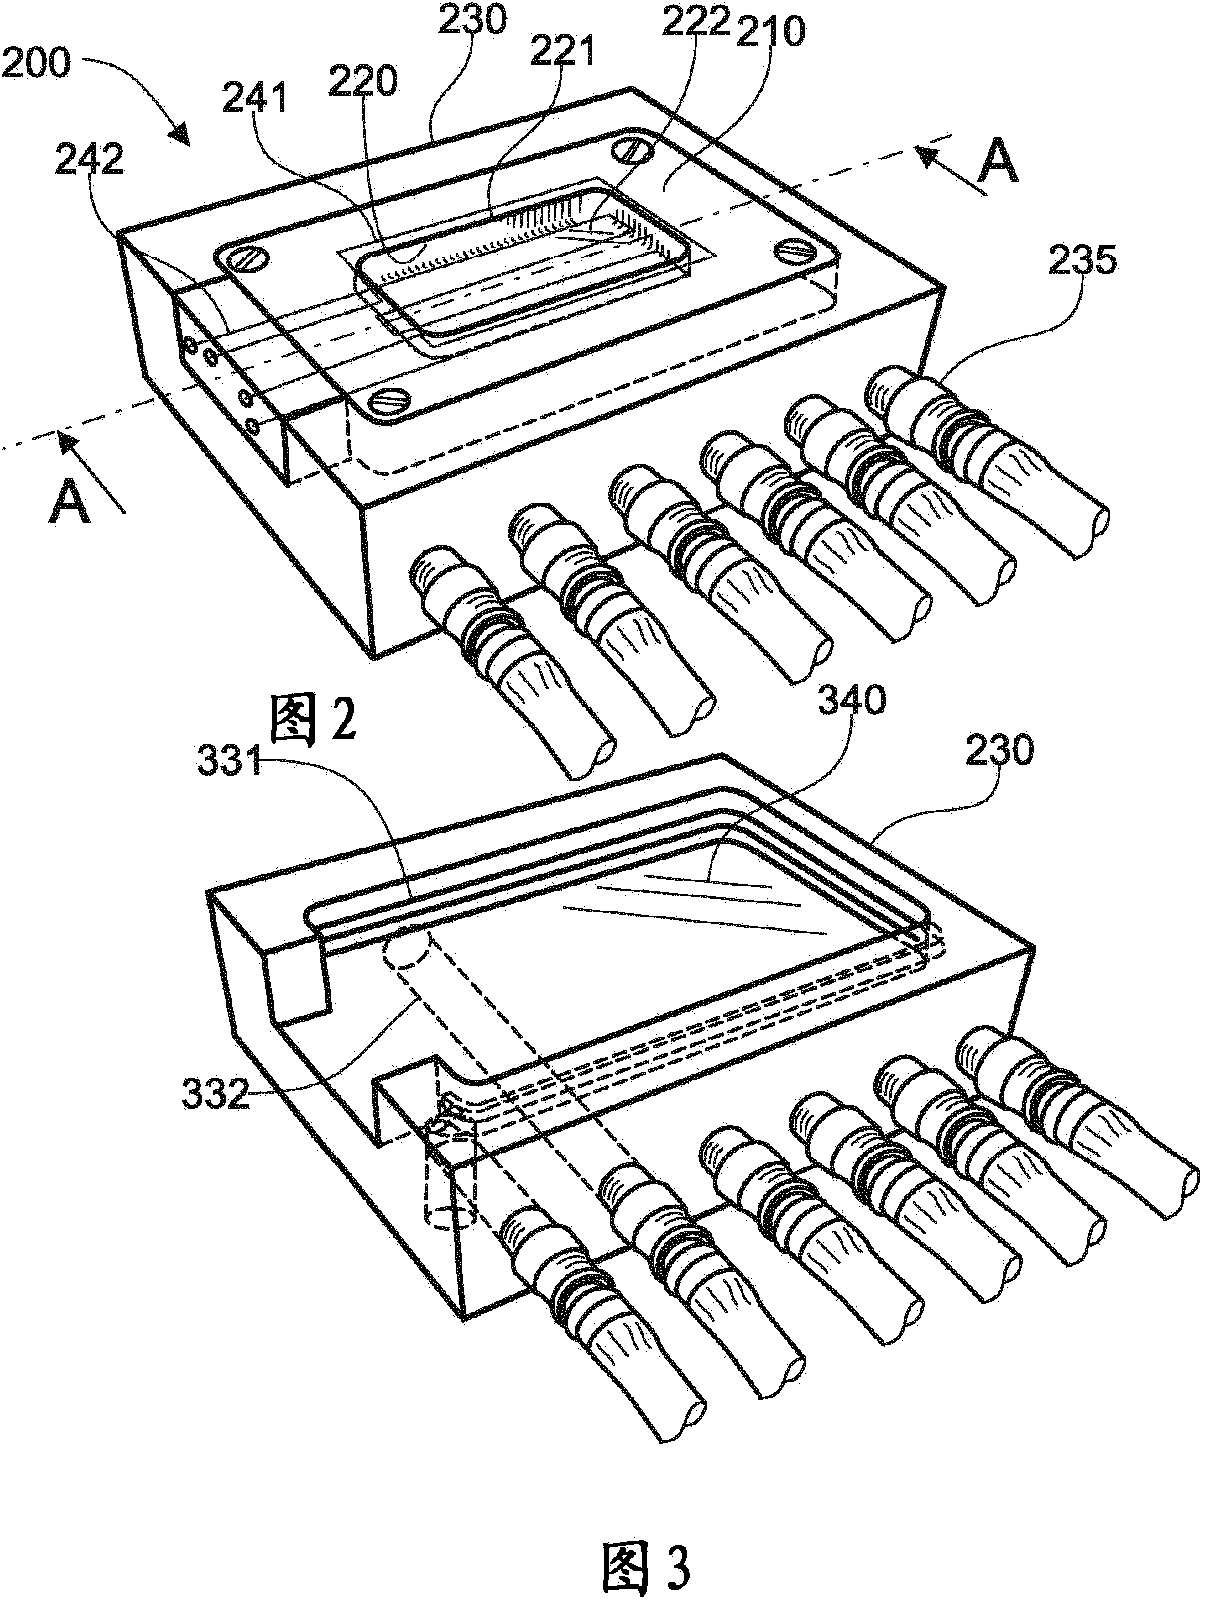 Device and method for compacting/consolidating a part made of a composite material having a thermoplastic matrix reinforced by continuous fibers, in particular fibers of natural origin